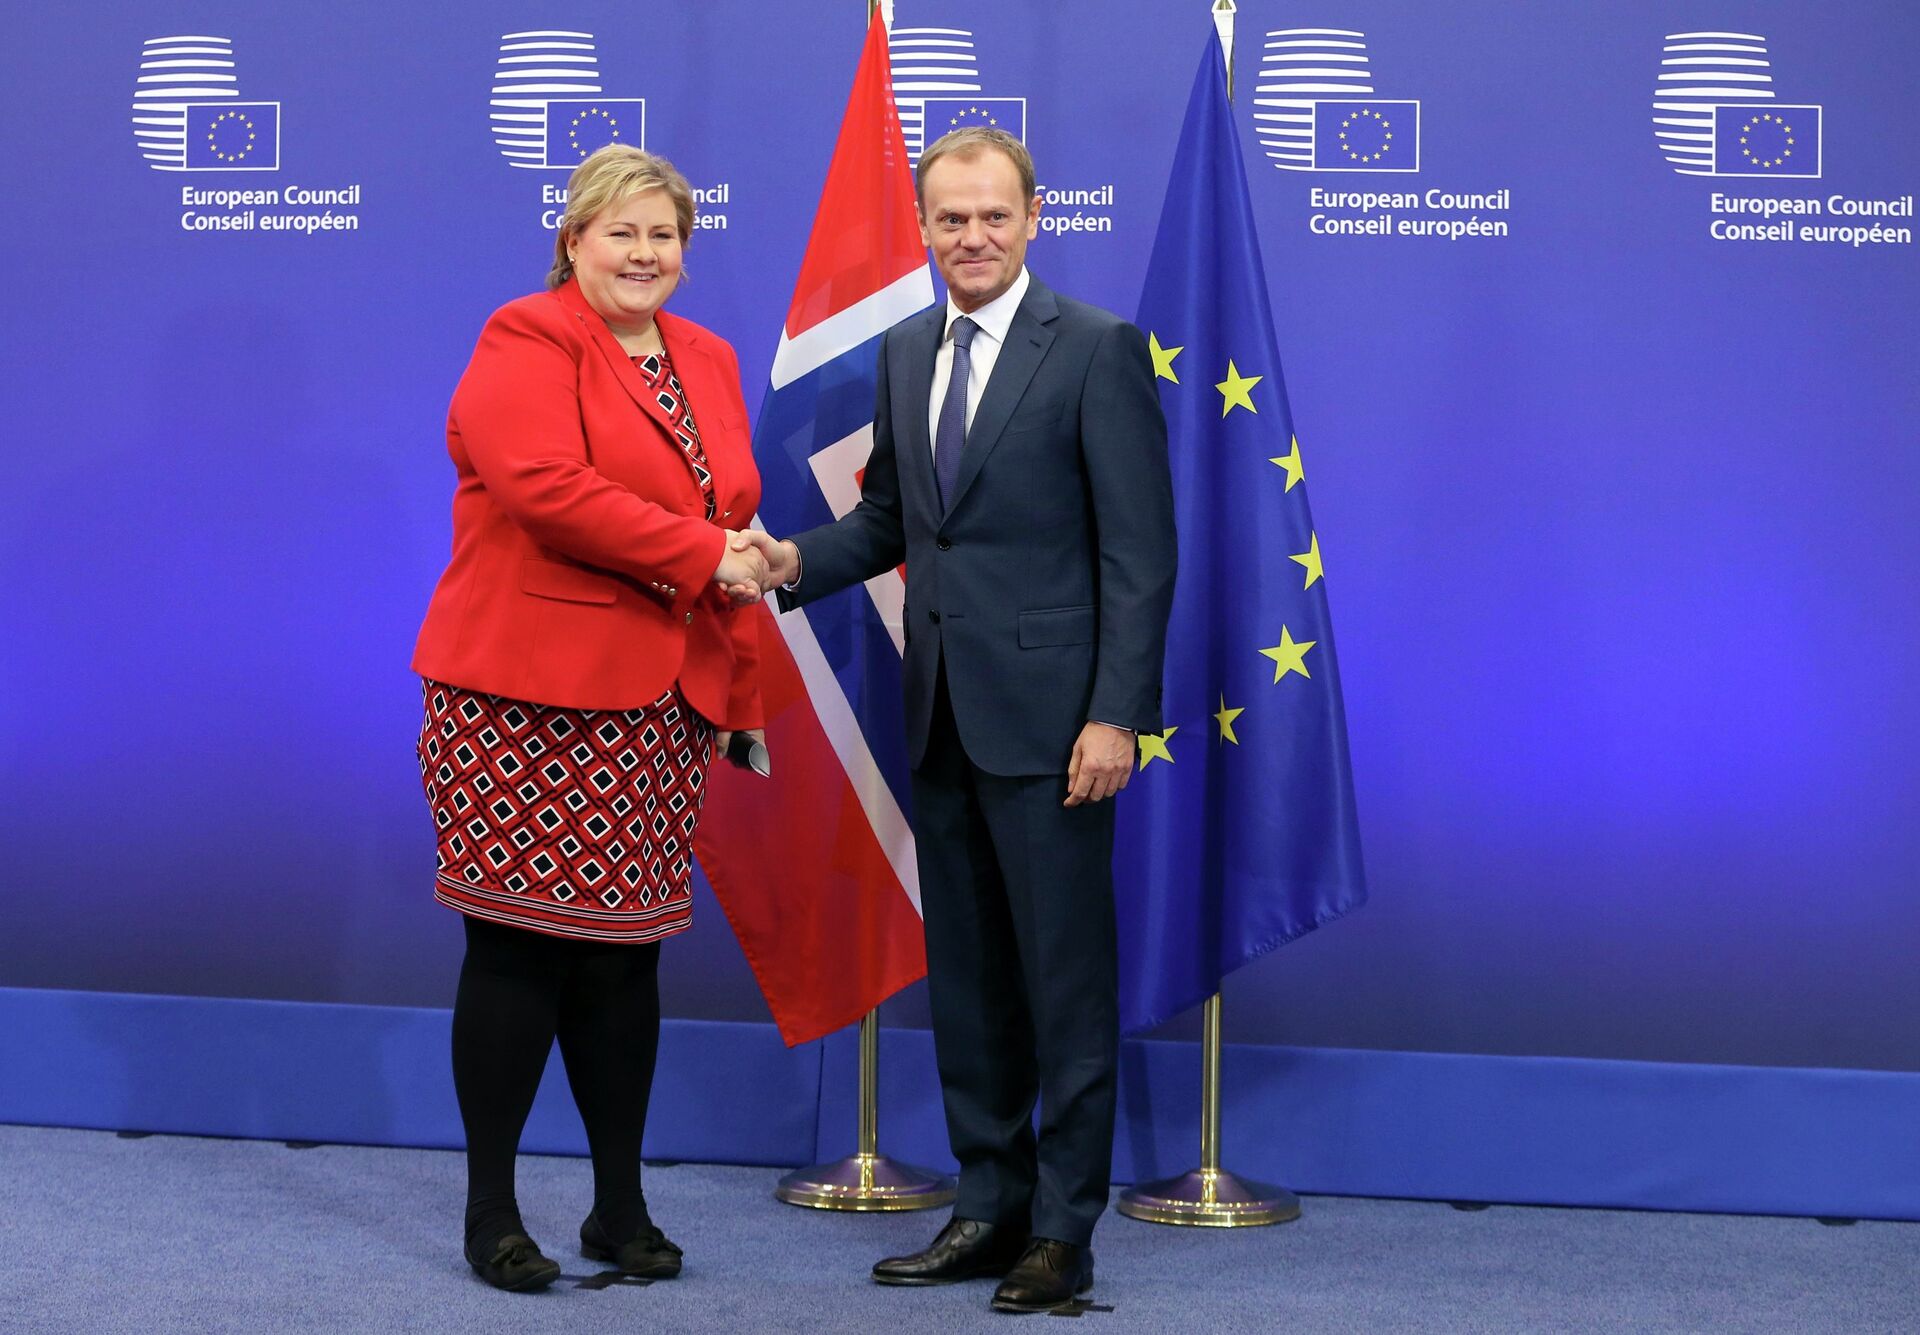 European Council President Donald Tusk poses with Norway's Prime Minister Erna Solberg (L) ahead of a meeting in Brussels January 21, 2015. - Sputnik International, 1920, 11.09.2021